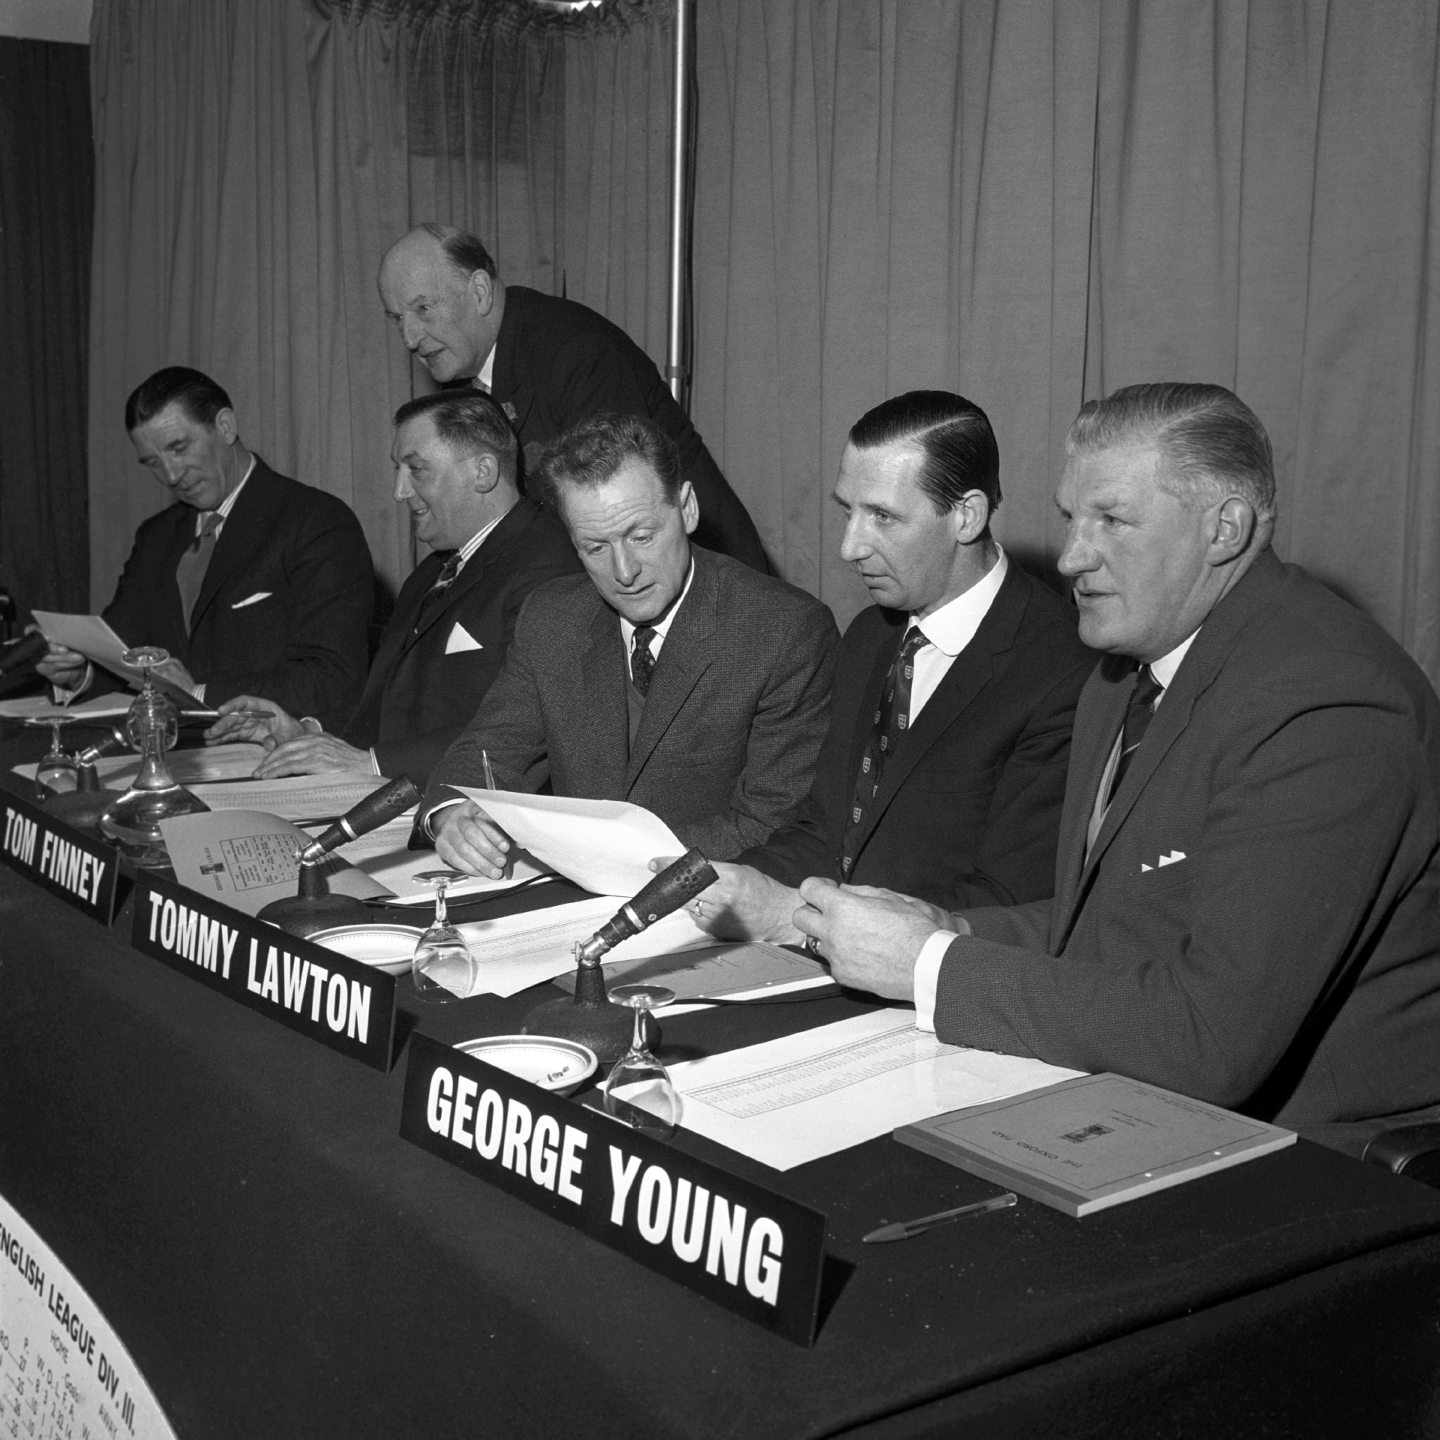 Lord Brabazon of Tara, the 78 year old chairman, looks over the shoulders of the three men of the panel. Image: PA.